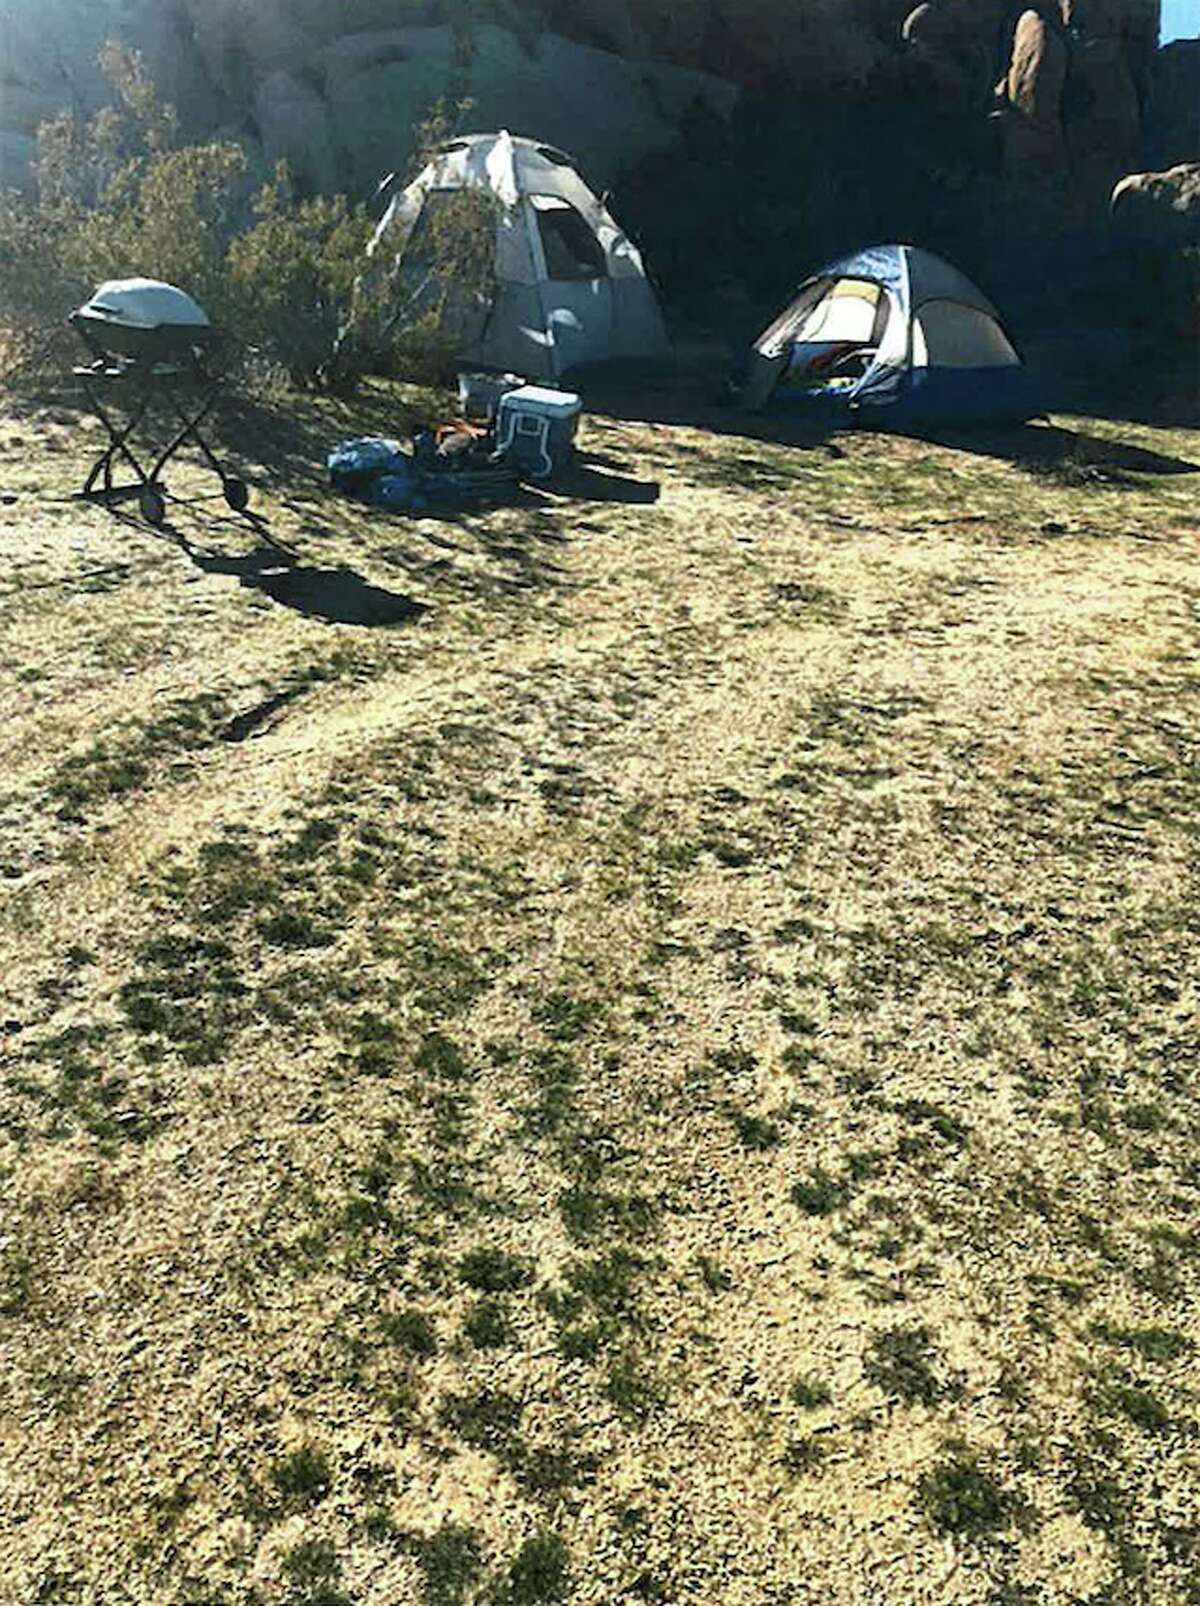 A picture provided by the National Park Service shows an illegal campsite at Joshua Tree National Park. The park sustained extra damage during the partial government shutdown.